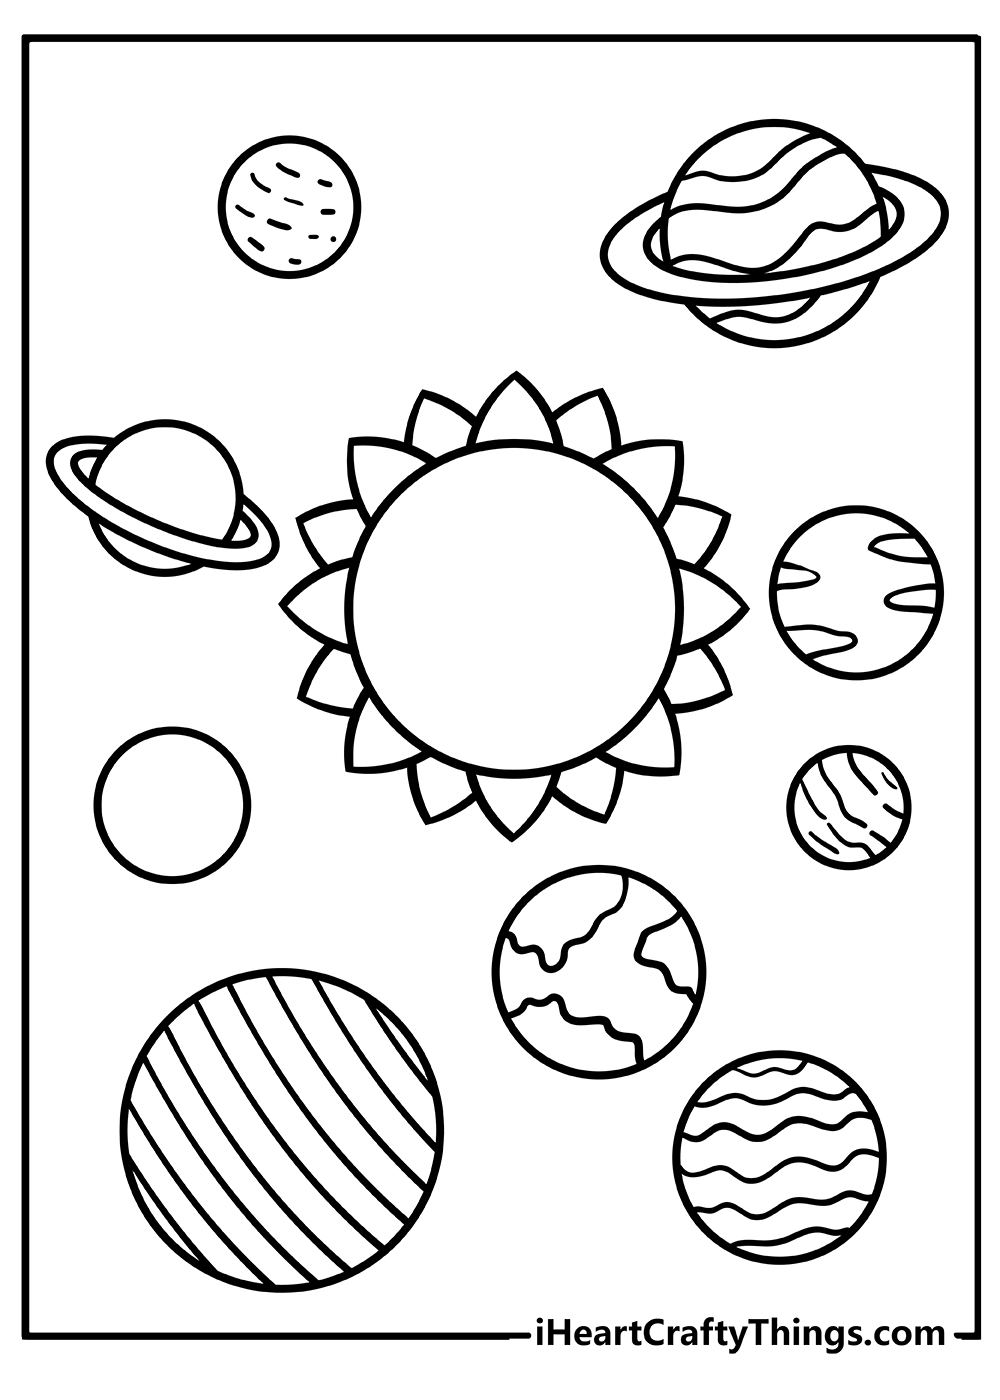 Printable Solar System Coloring Pages Updated 20